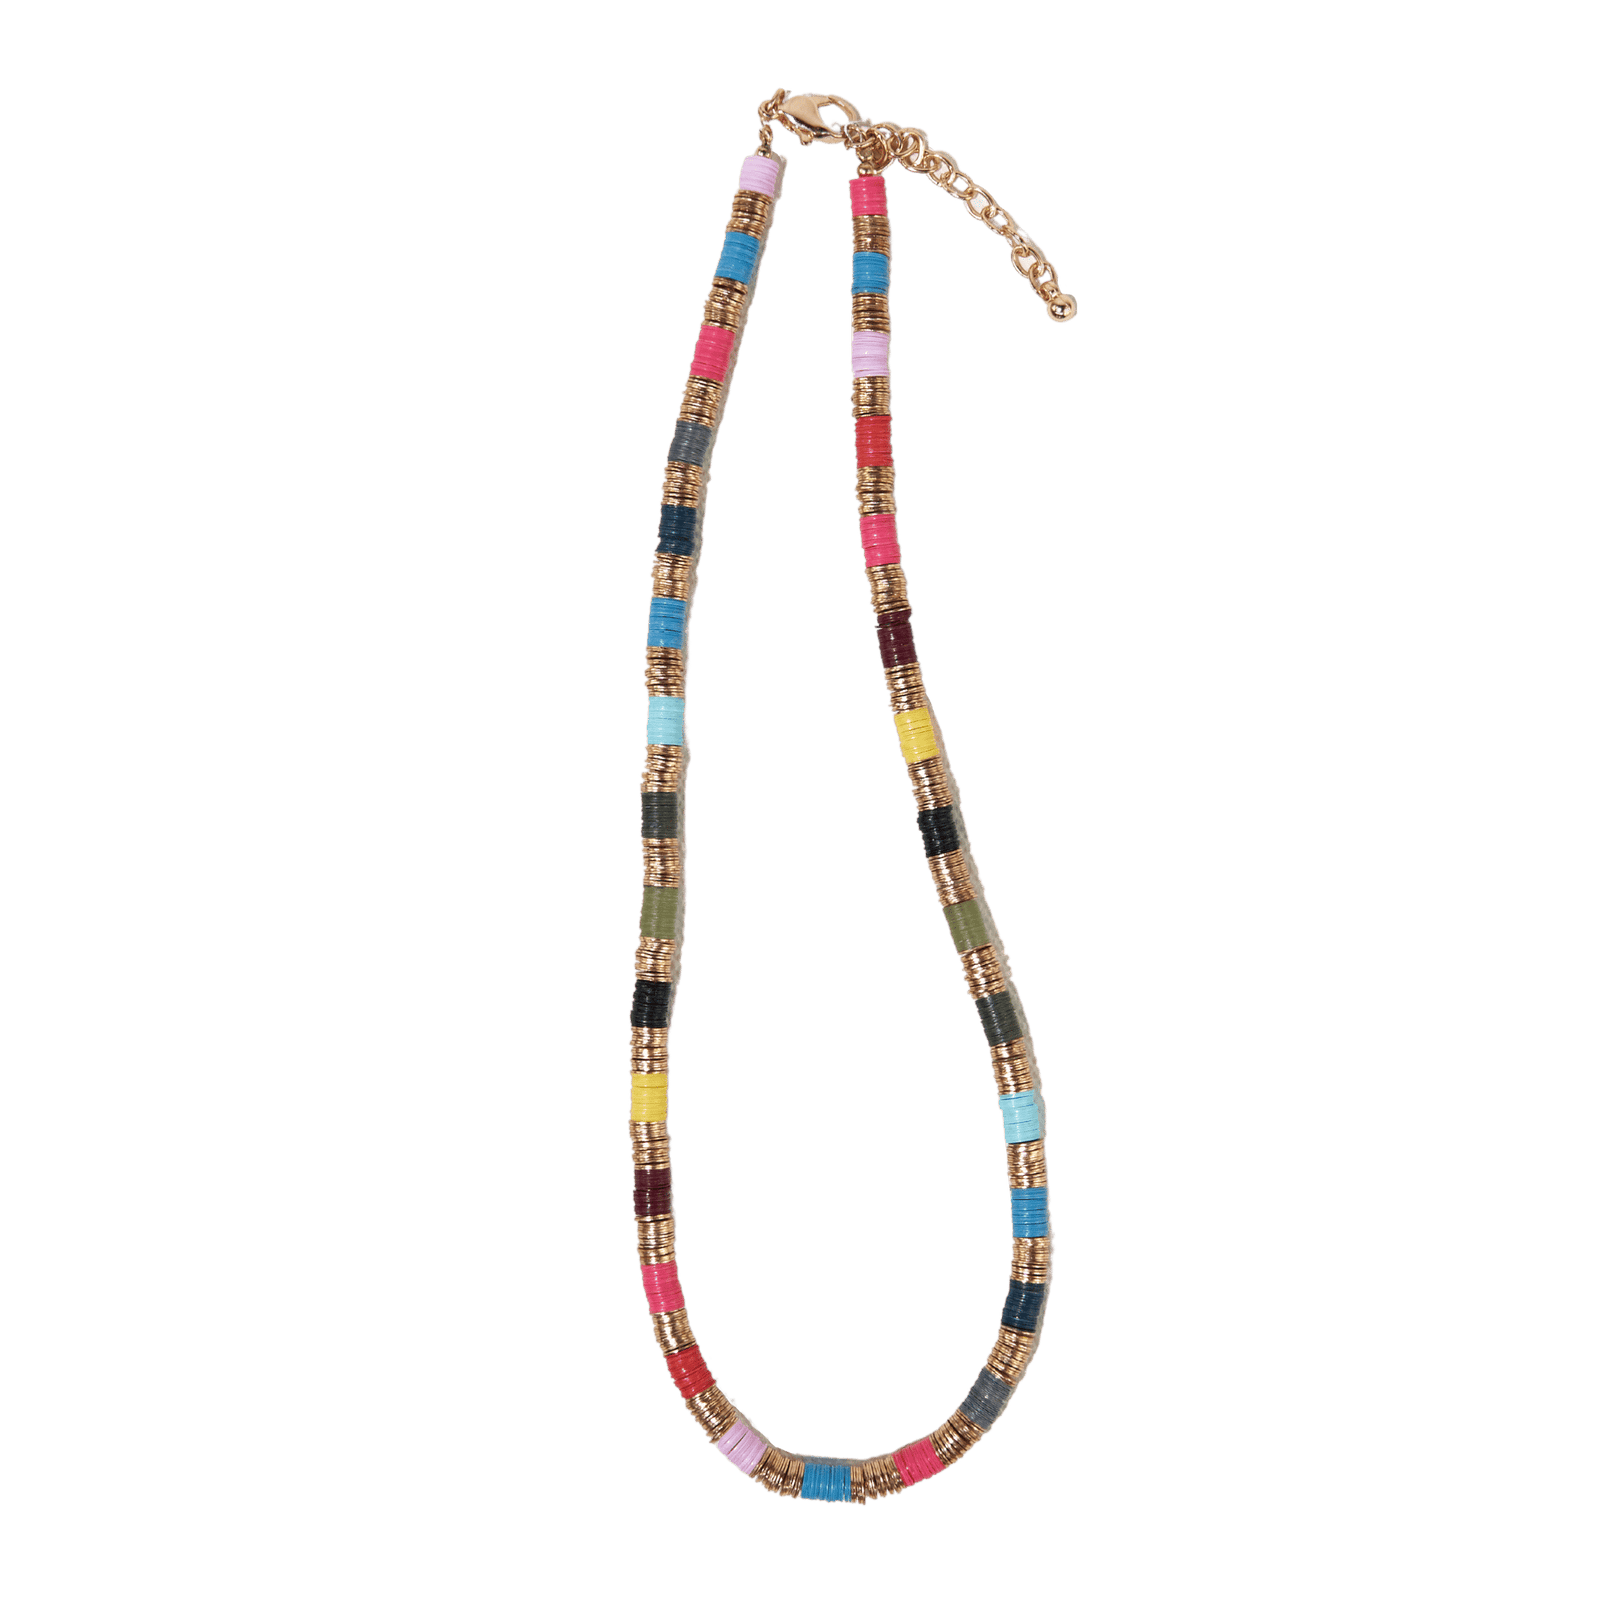 Buy Beaded Necklaces for Women Online from Wholesale Suppliers - Creoate